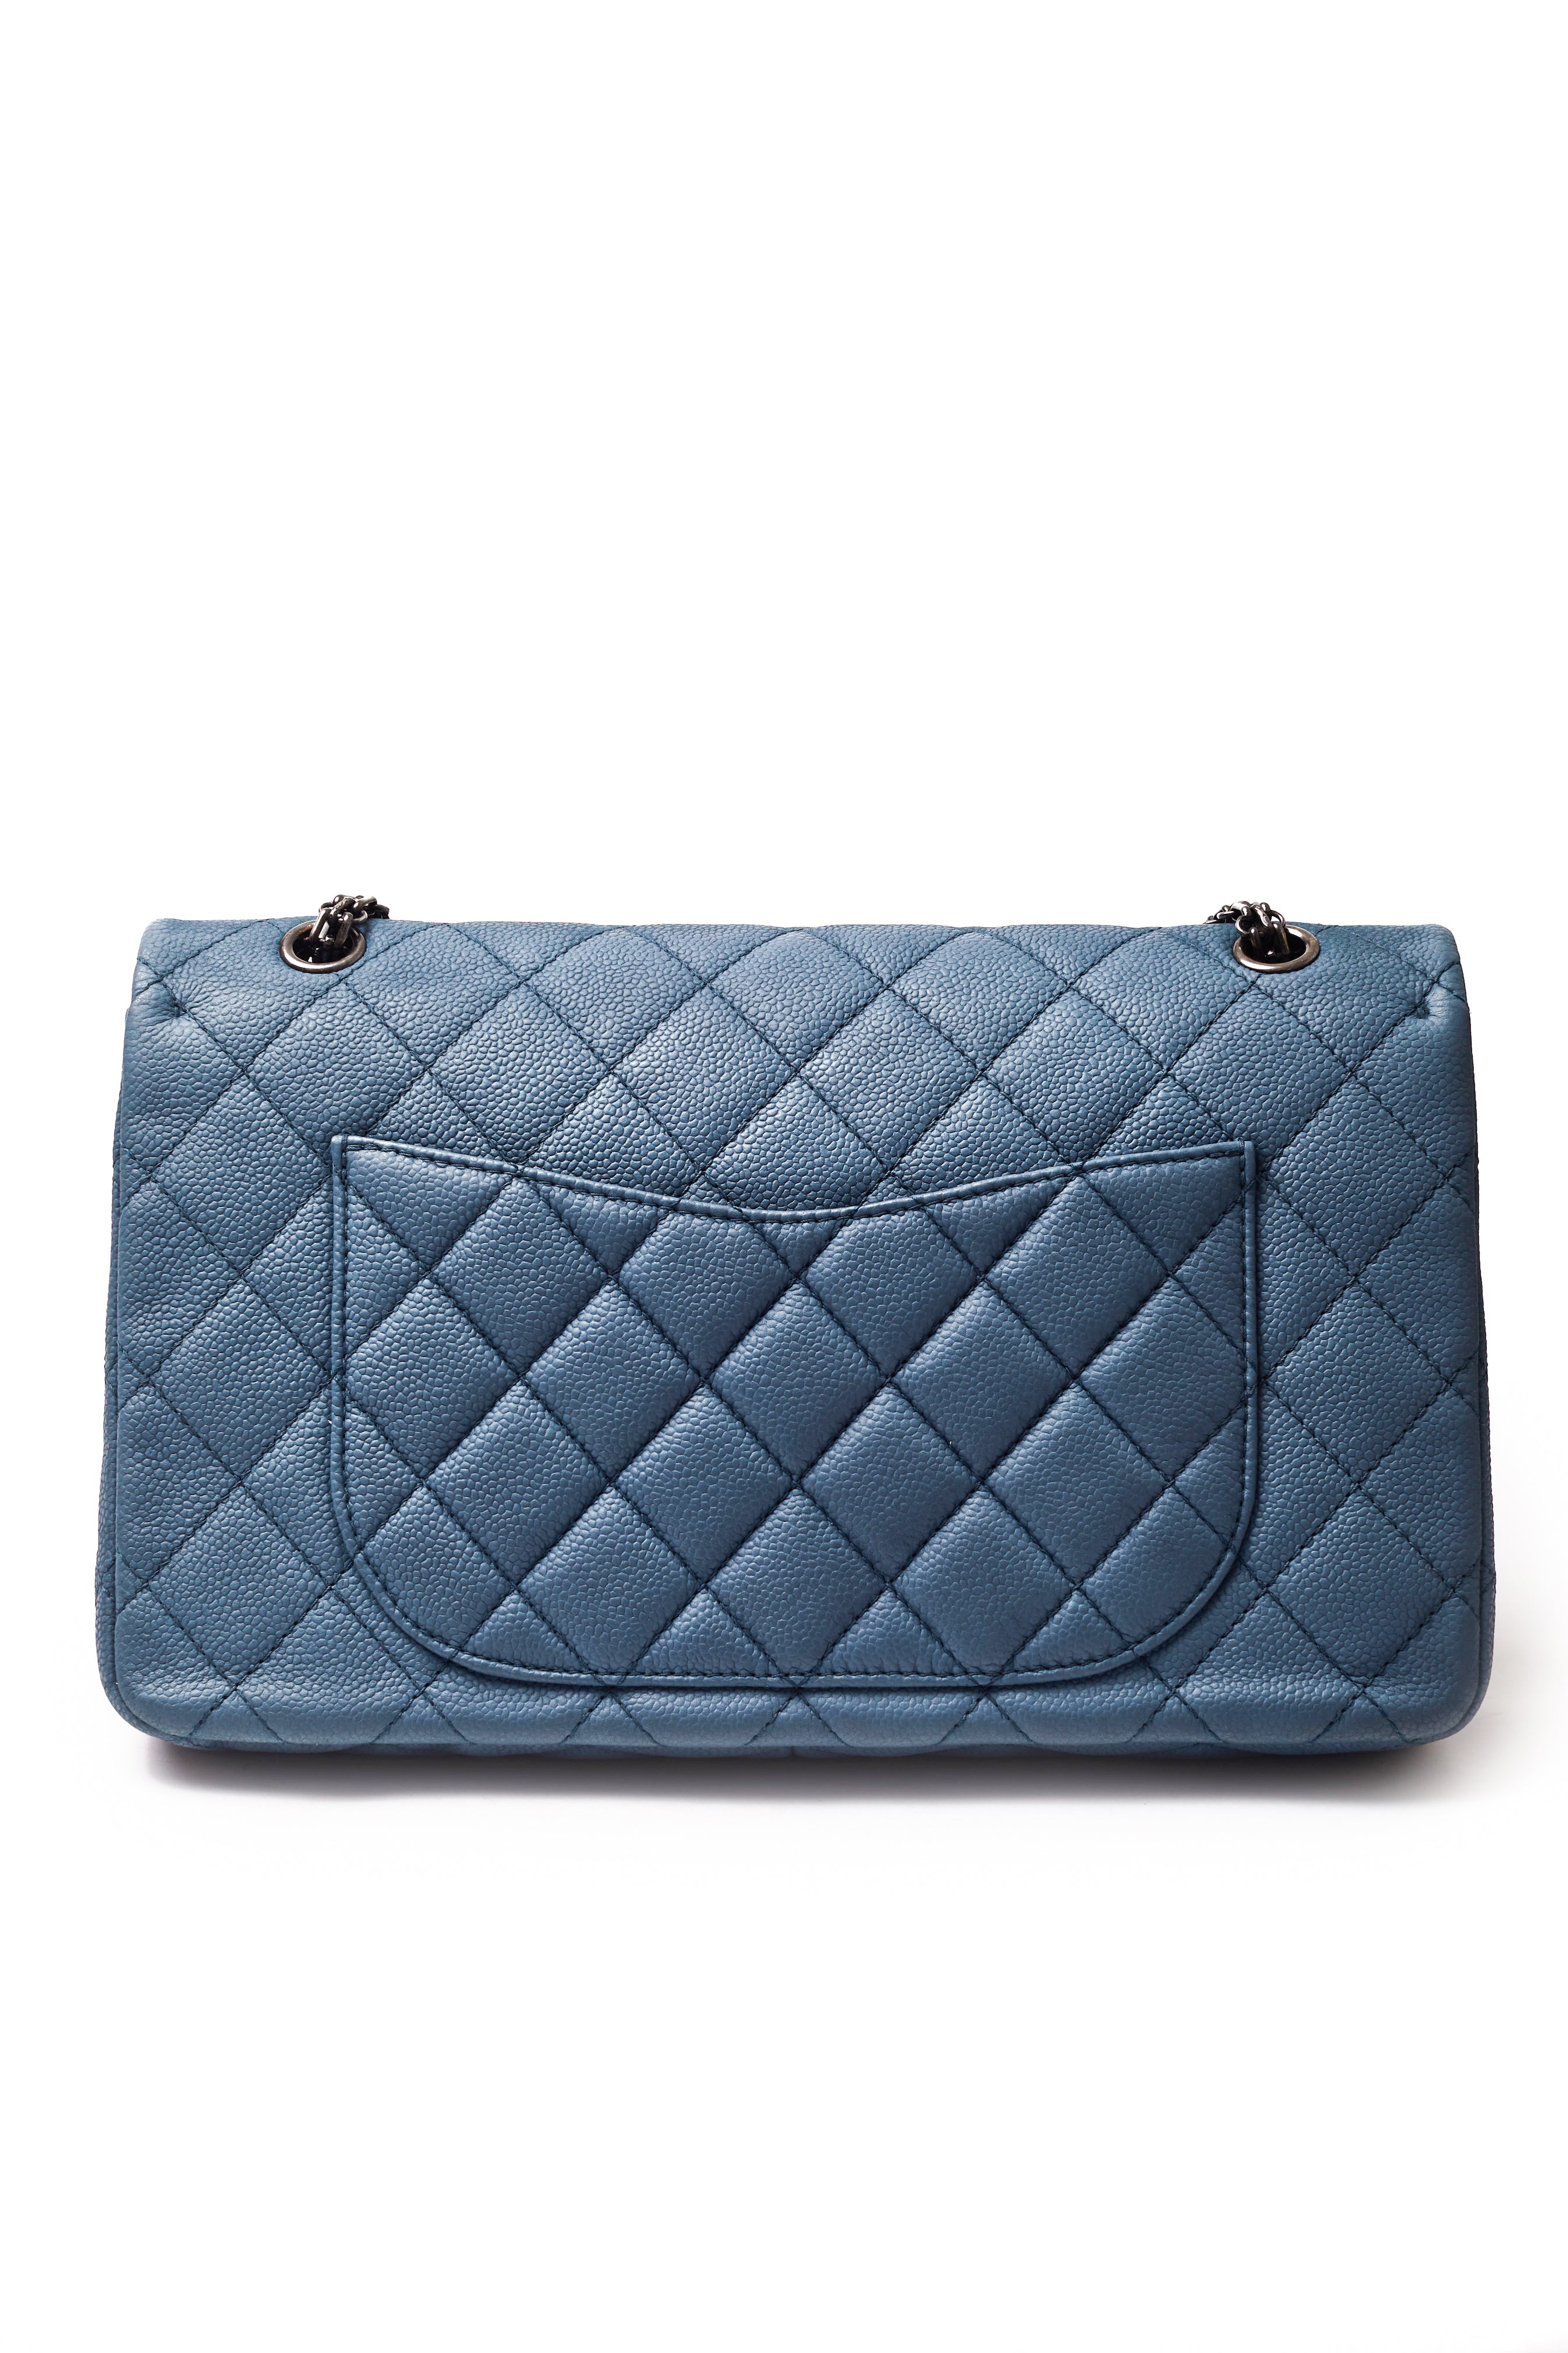 Chanel <br> Pre-Fall 2013 large 2.55 bag with gunmetal gray hardware